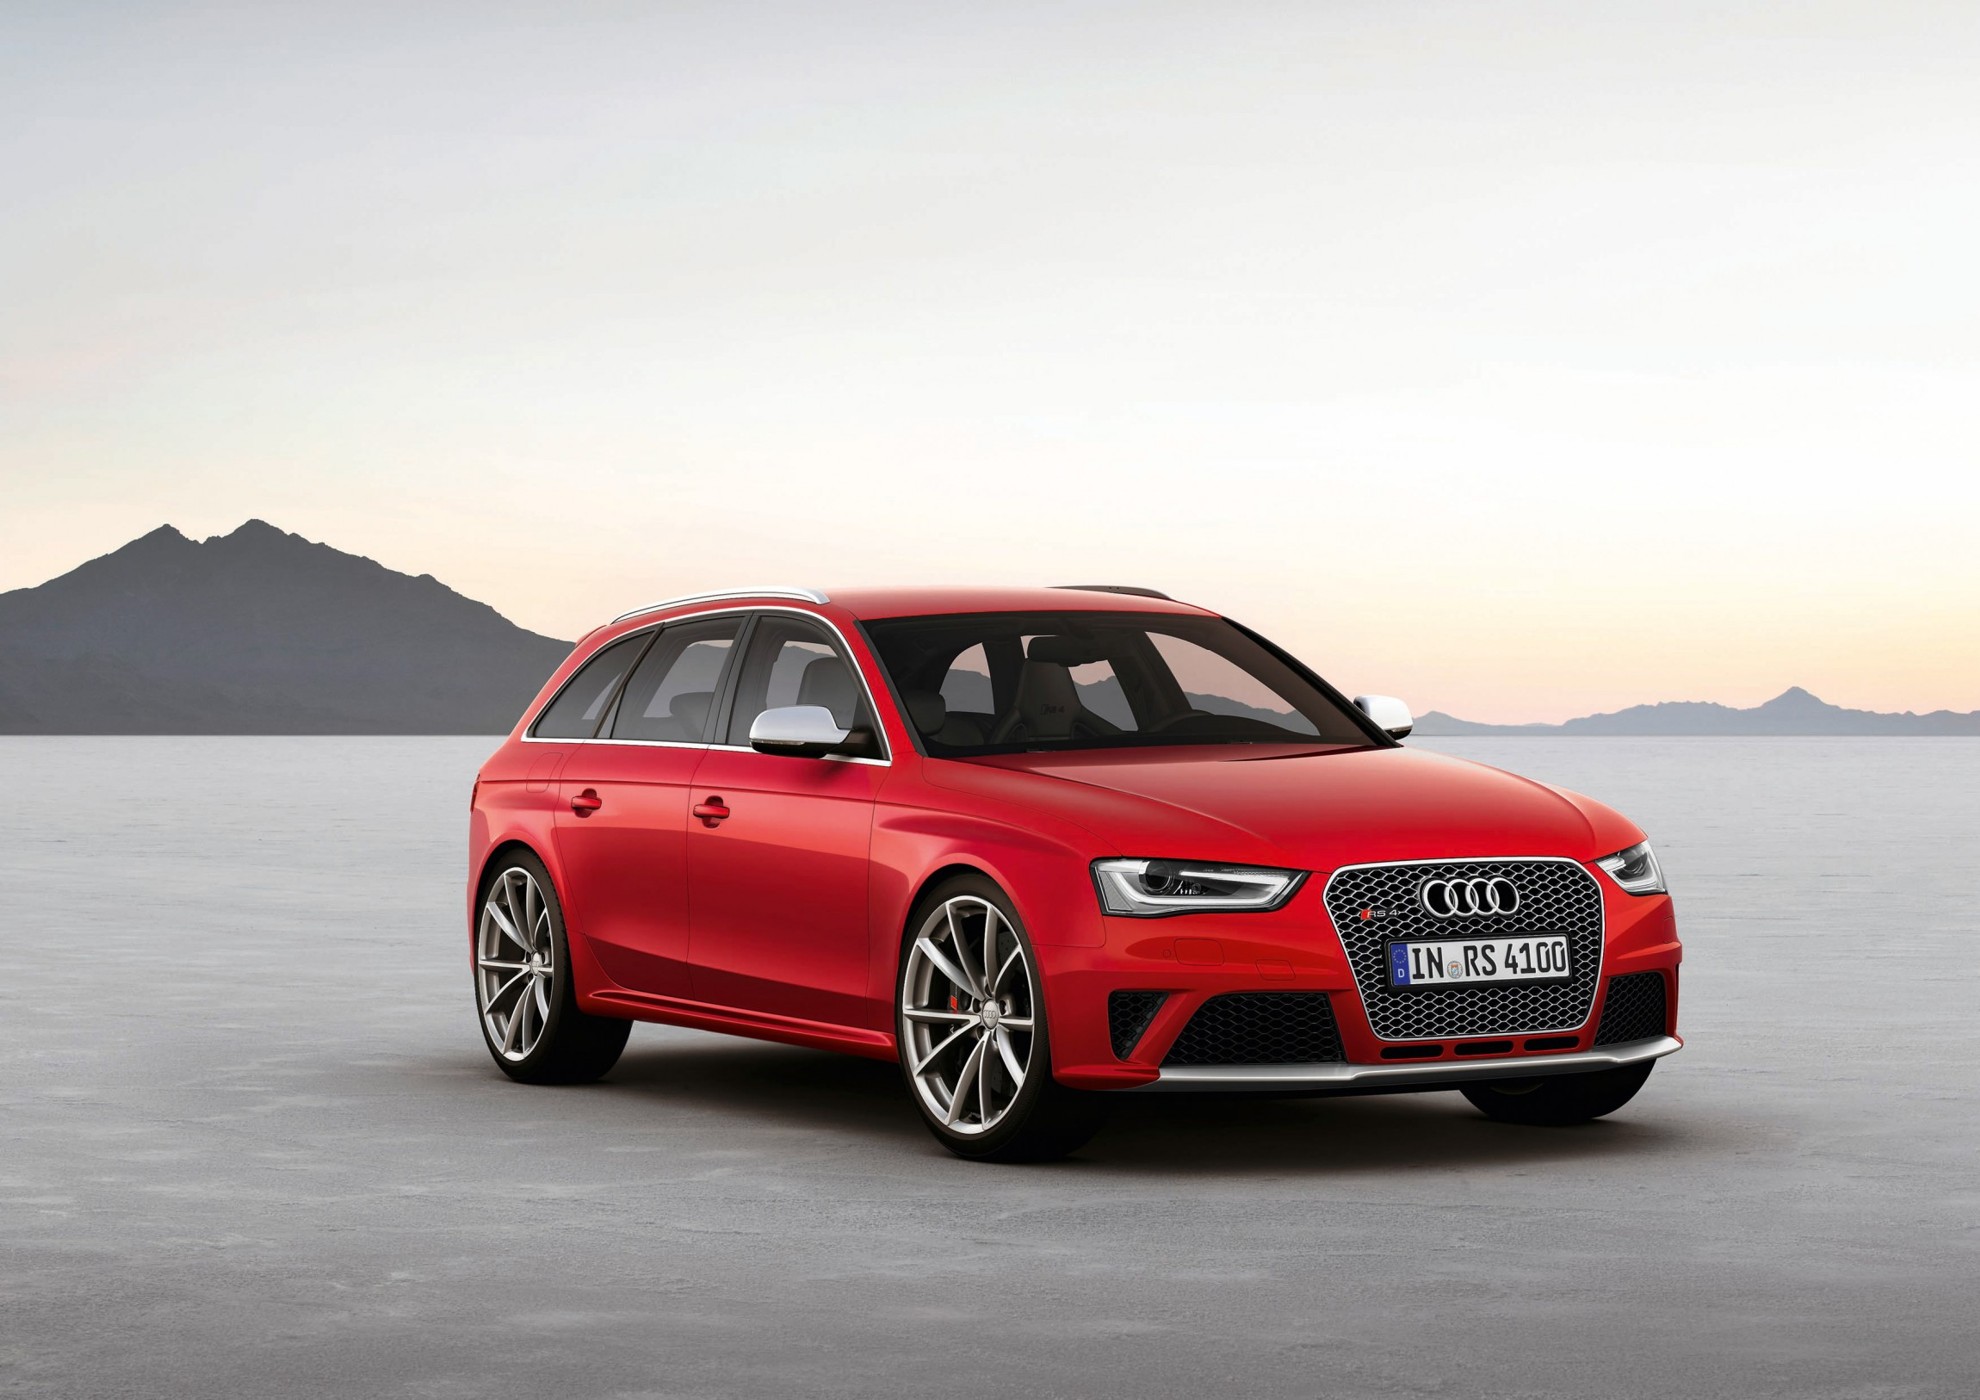 Audi RS4 Avant – now available in South Africa